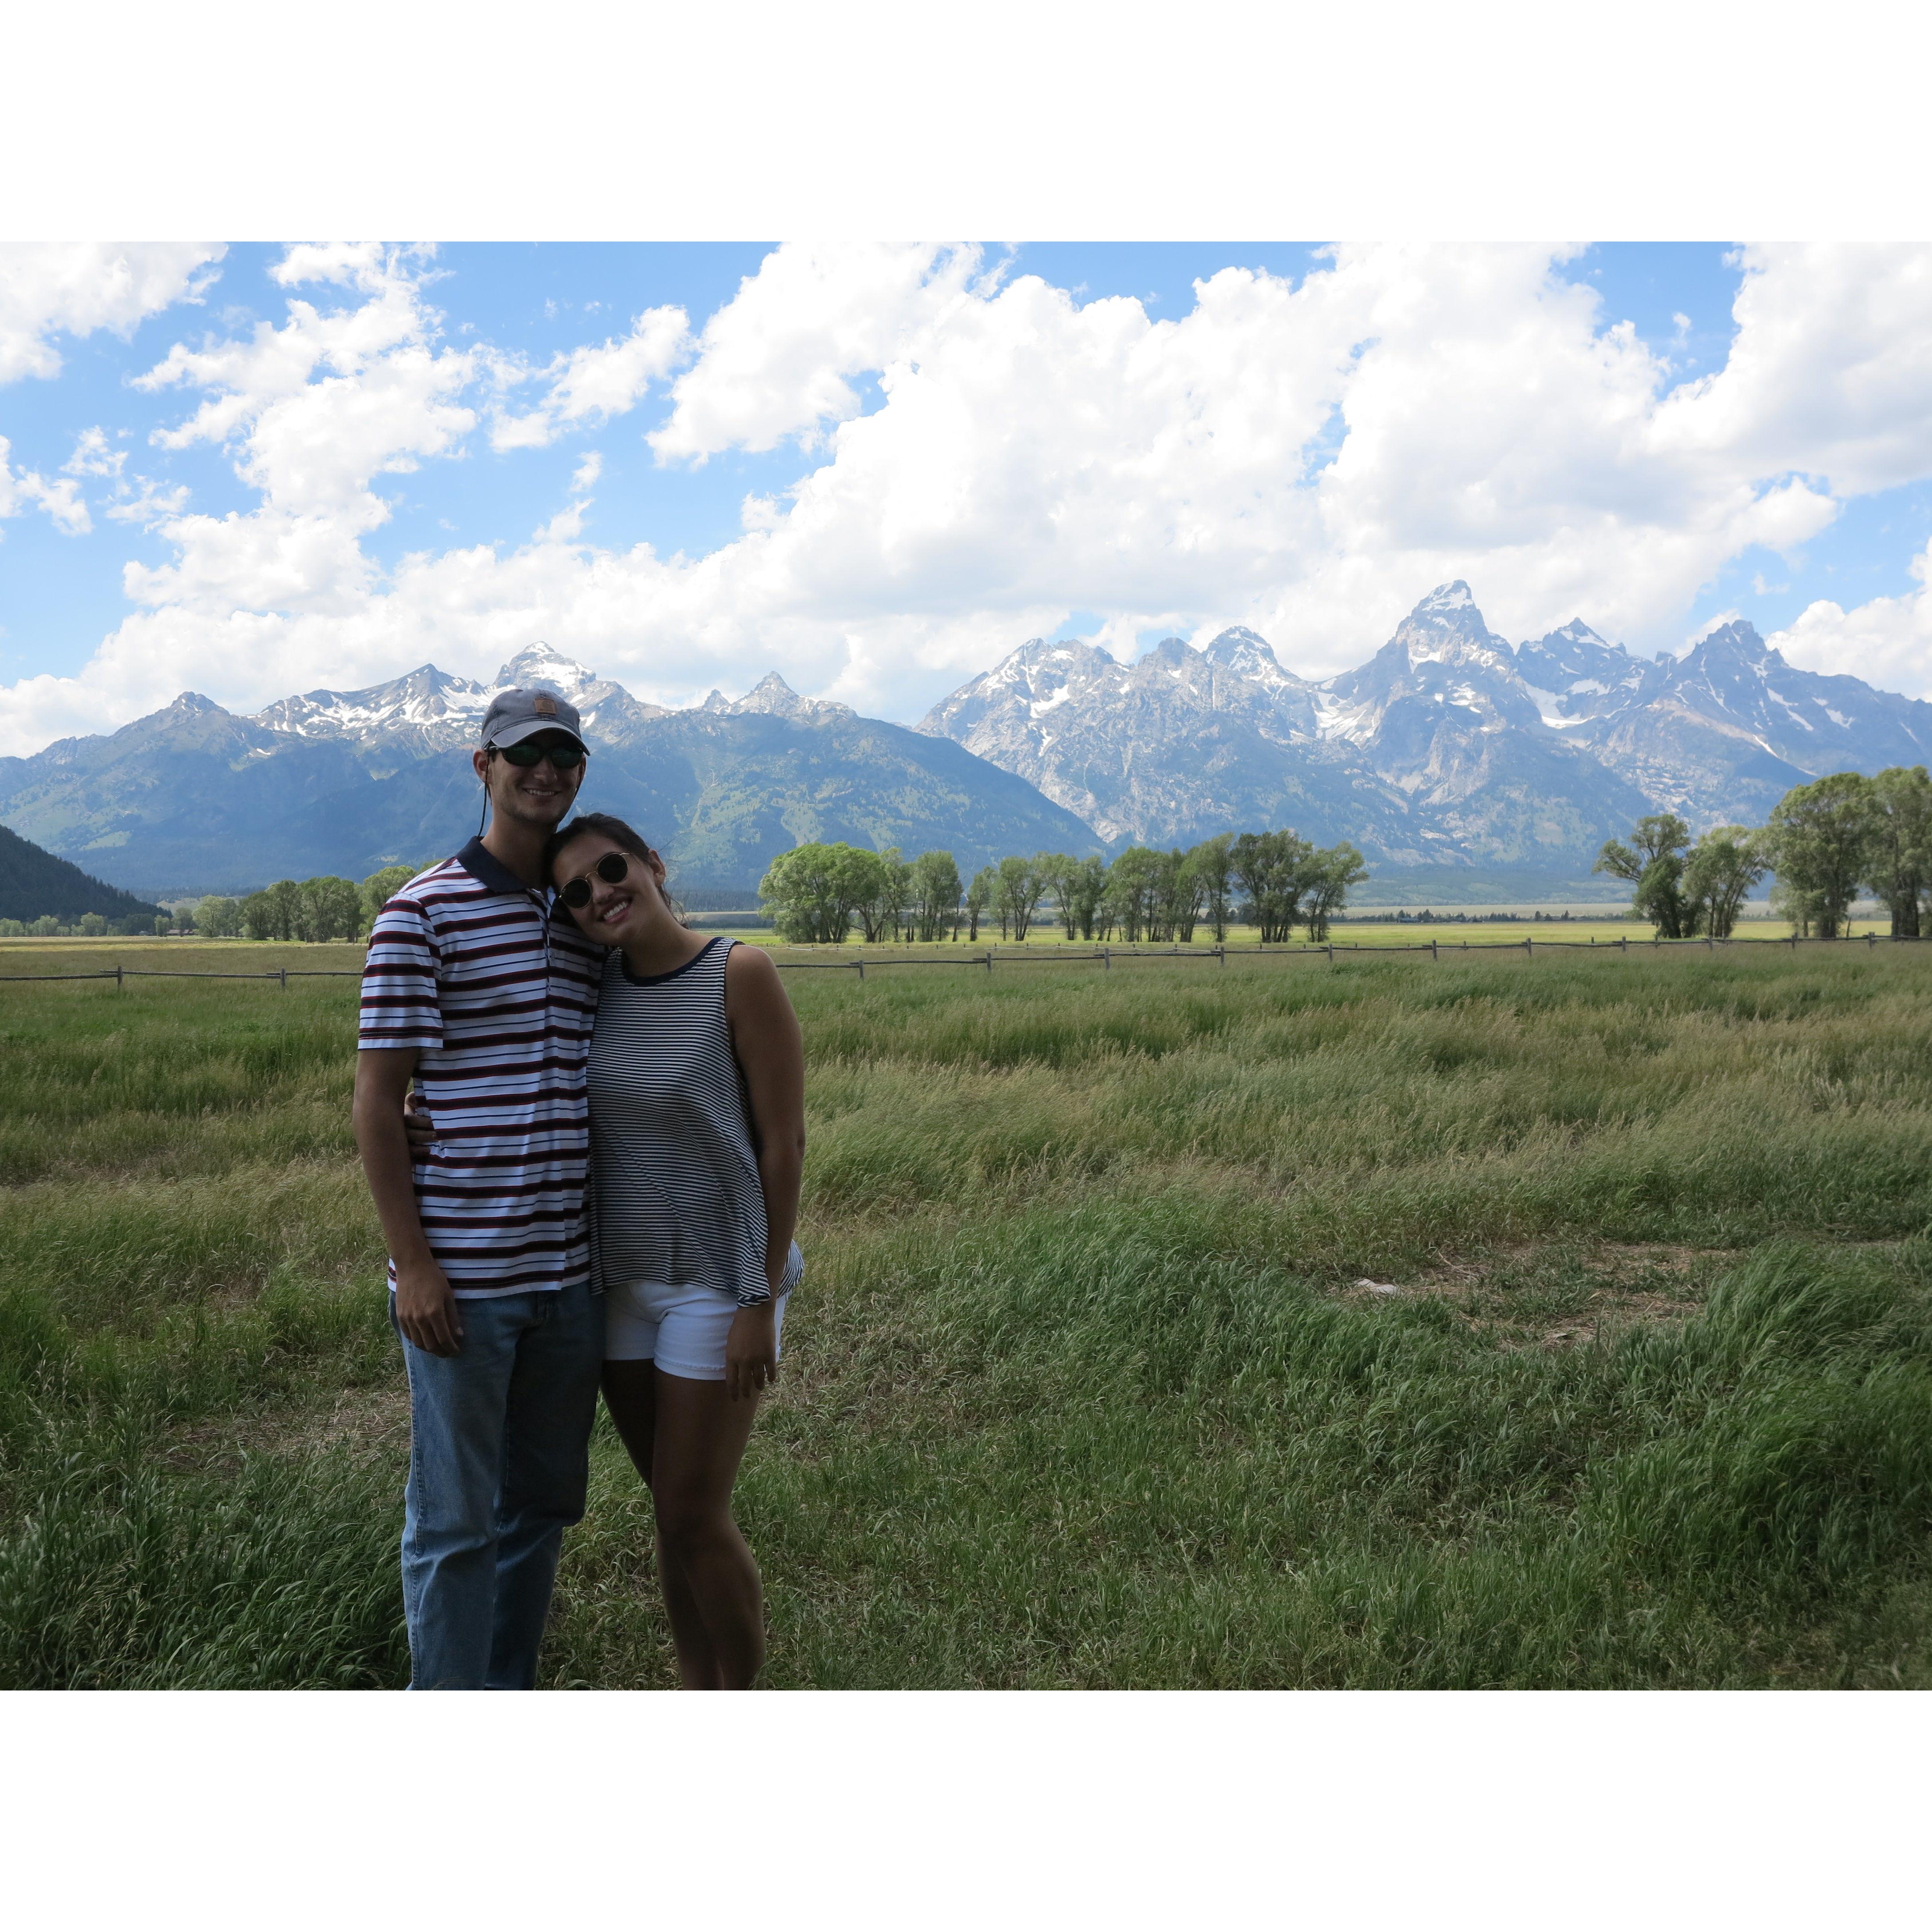 grand tetons - savannah's biggest competition for will's love